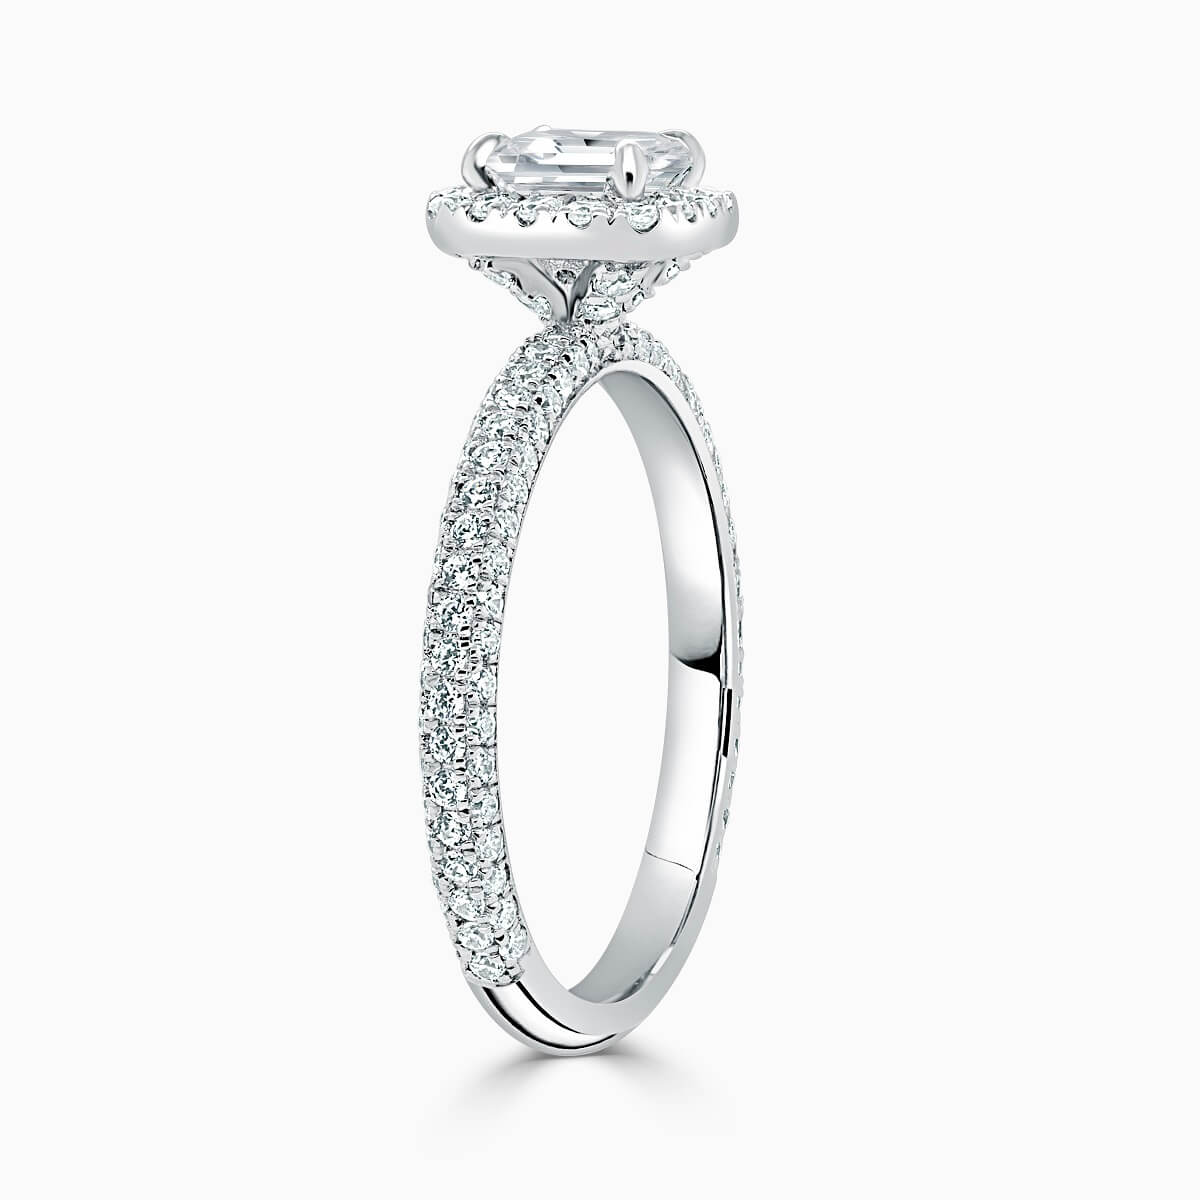 Platinum Princess Cut Halo With Micro Pave Engagement Ring